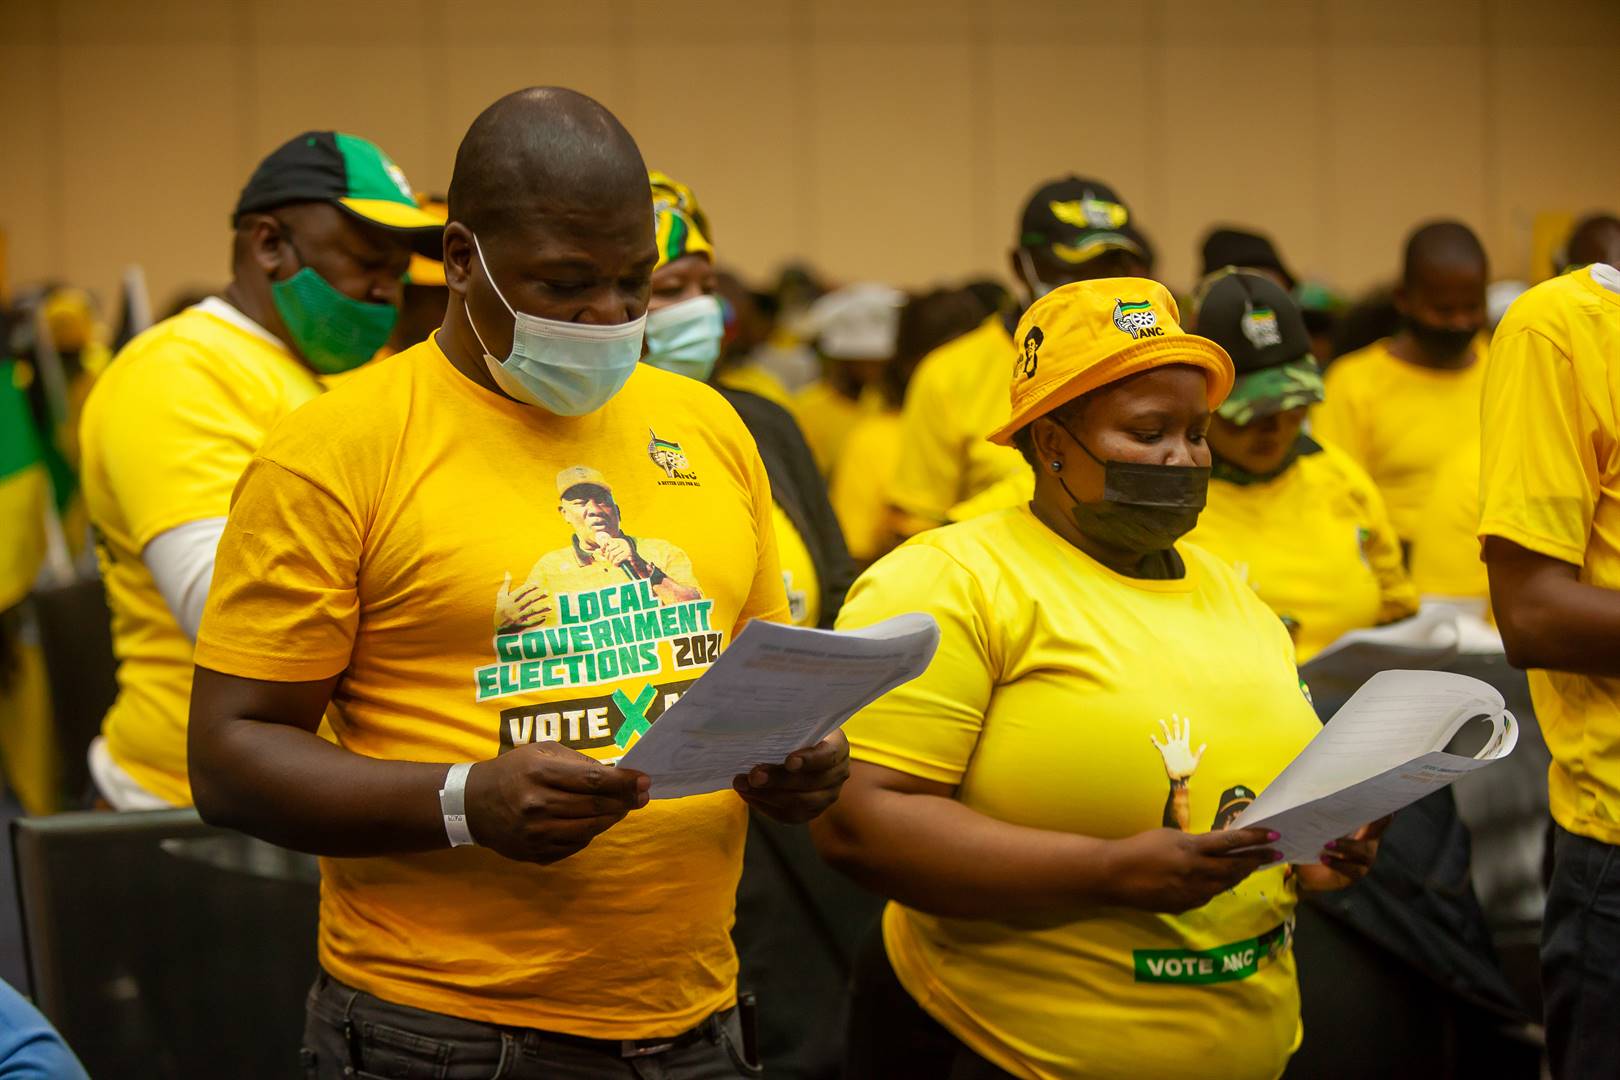 ANC councillor candidates at the inaugural roll call event at Alberton Civic Centre on Tuesday. Photo: Papi Morake/Gallo Images